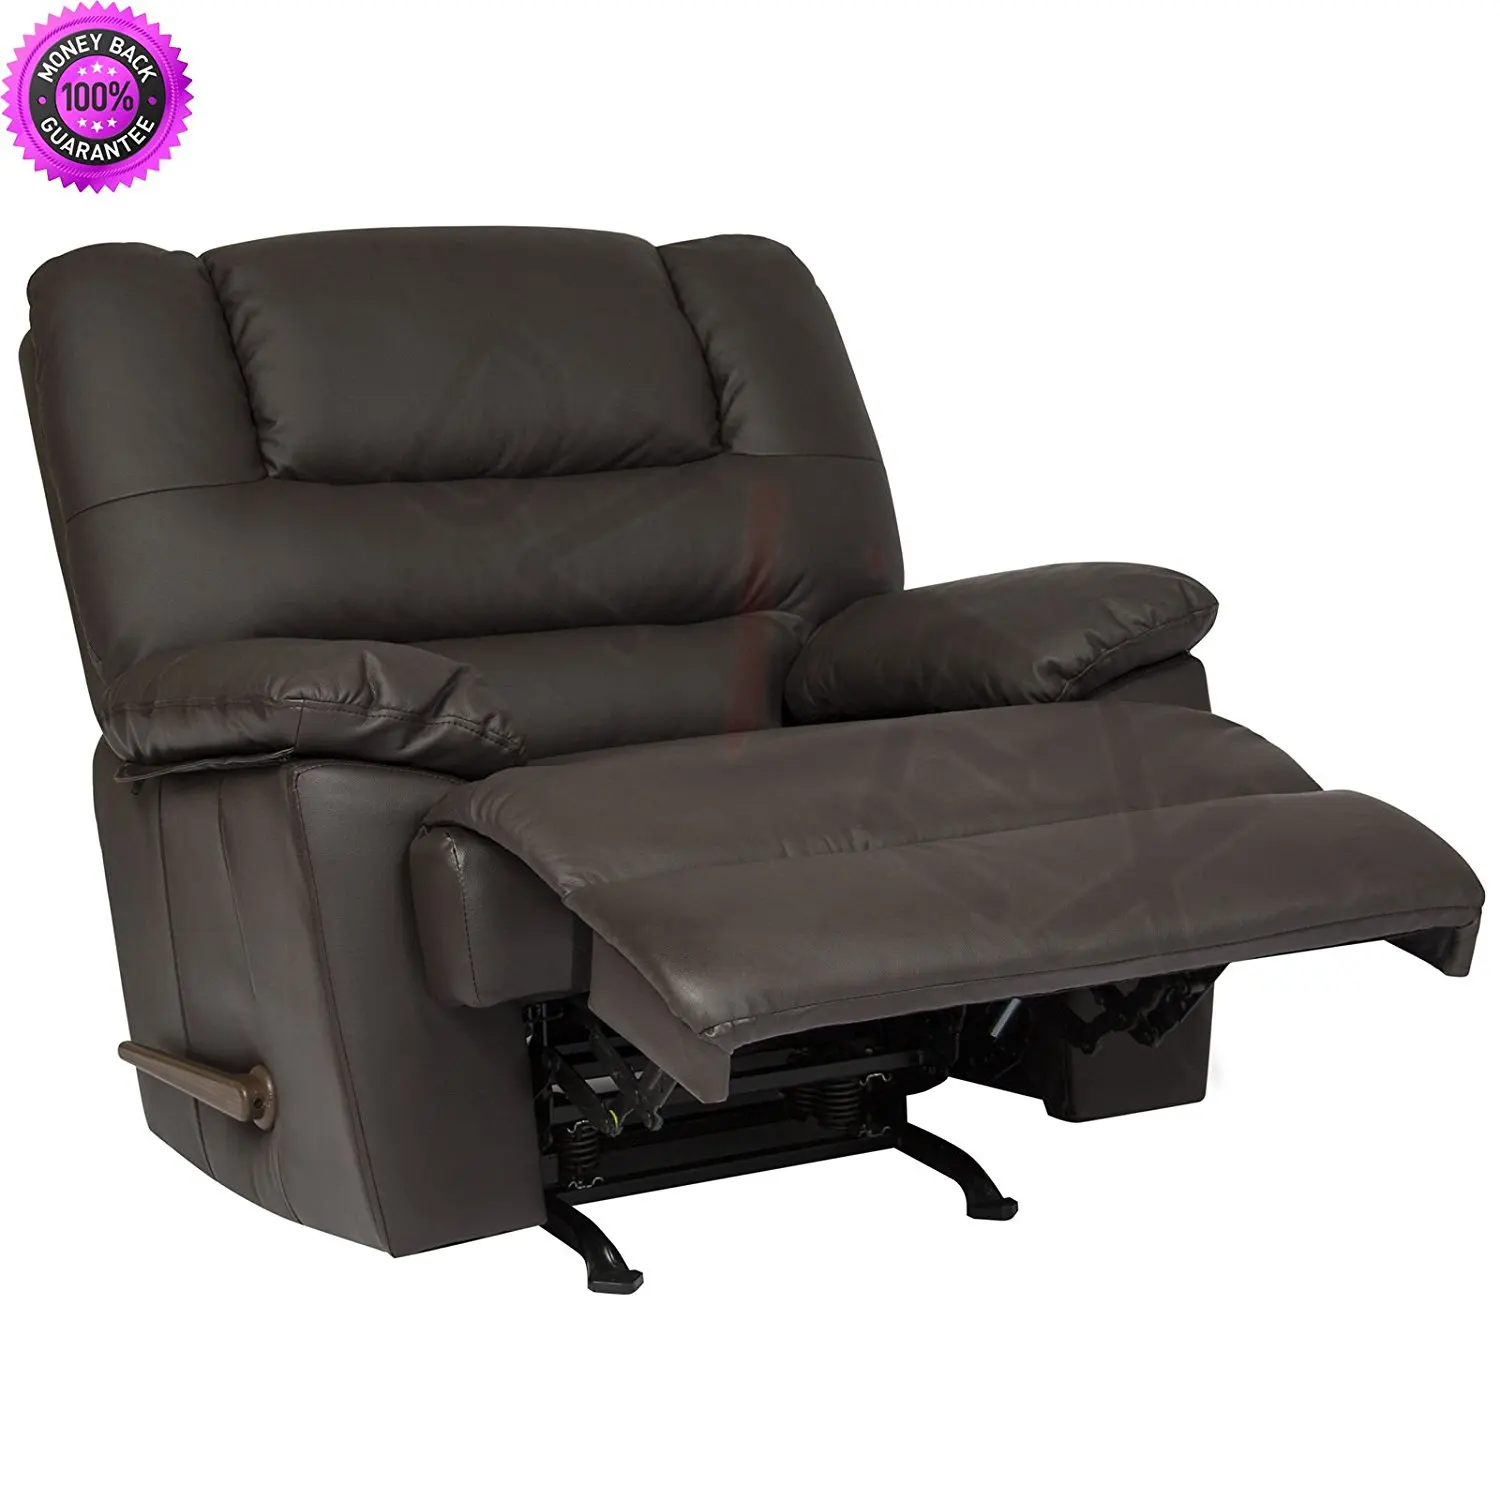 Buy DzVeX_Deluxe Padded Leather Rocking Recliner Chair (Brown) And